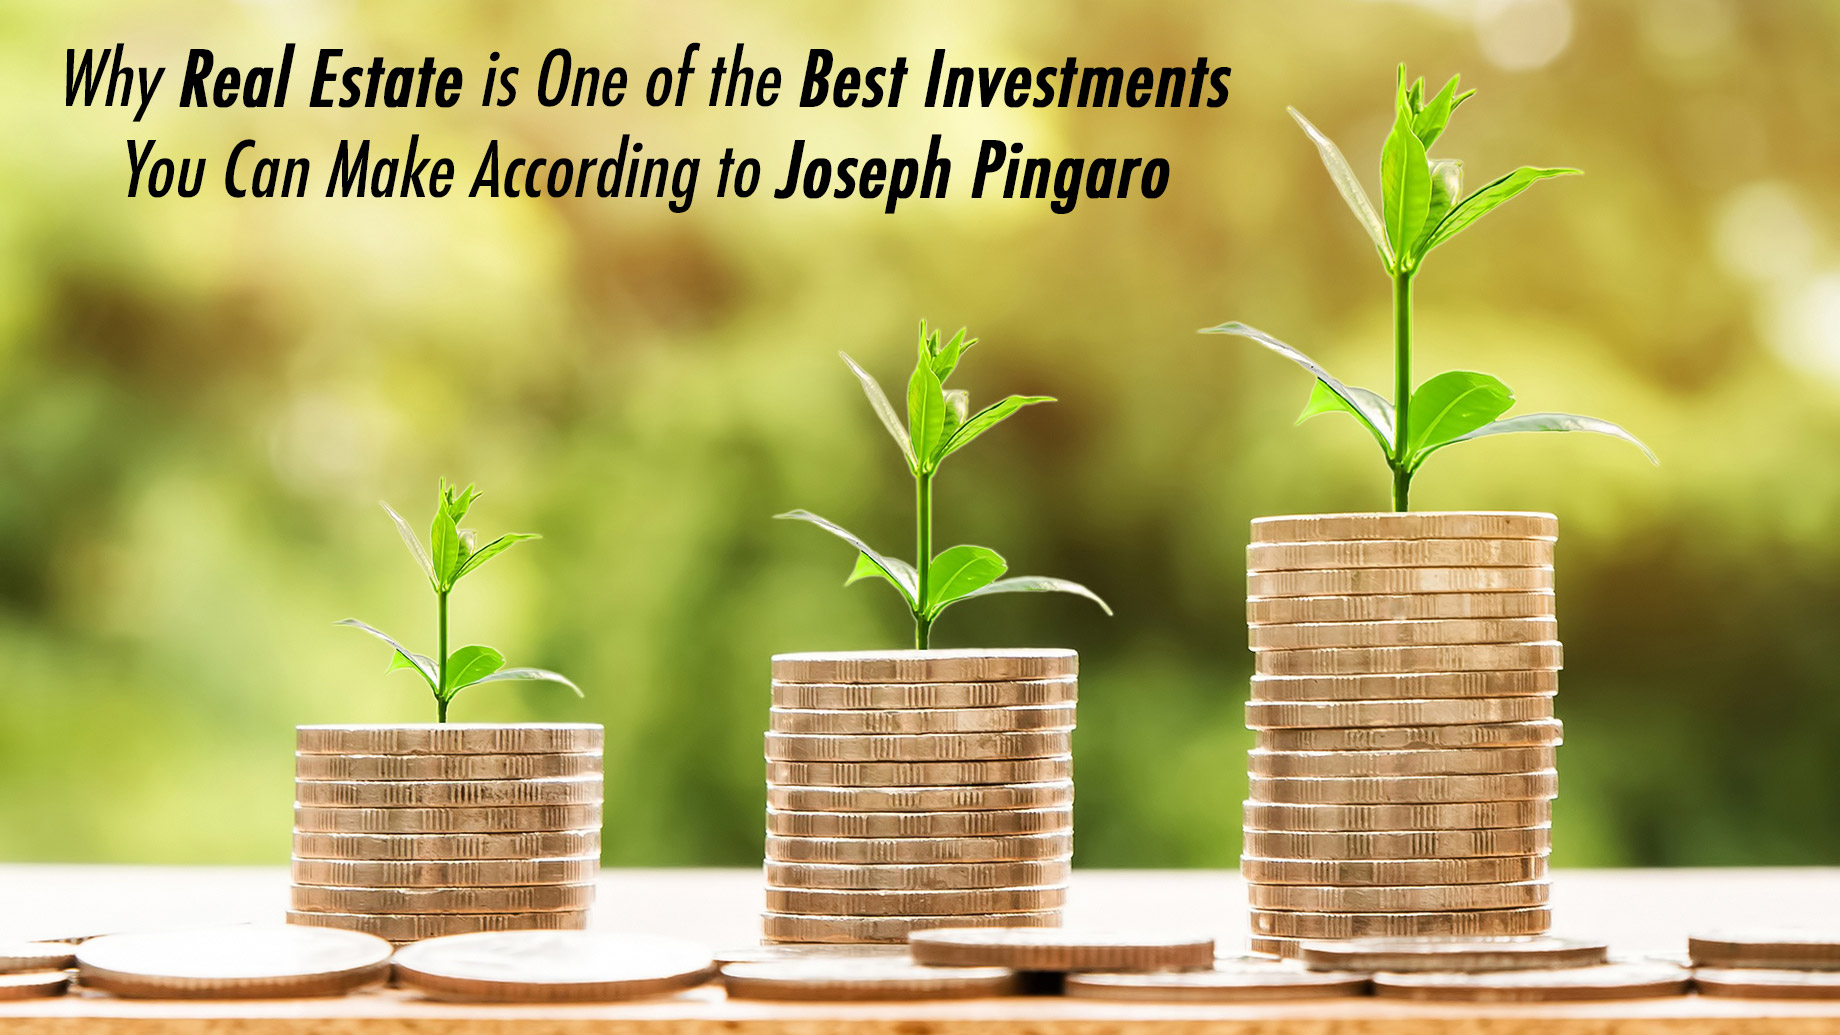 Why Real Estate is One of the Best Investments You Can Make According to Joseph Pingaro